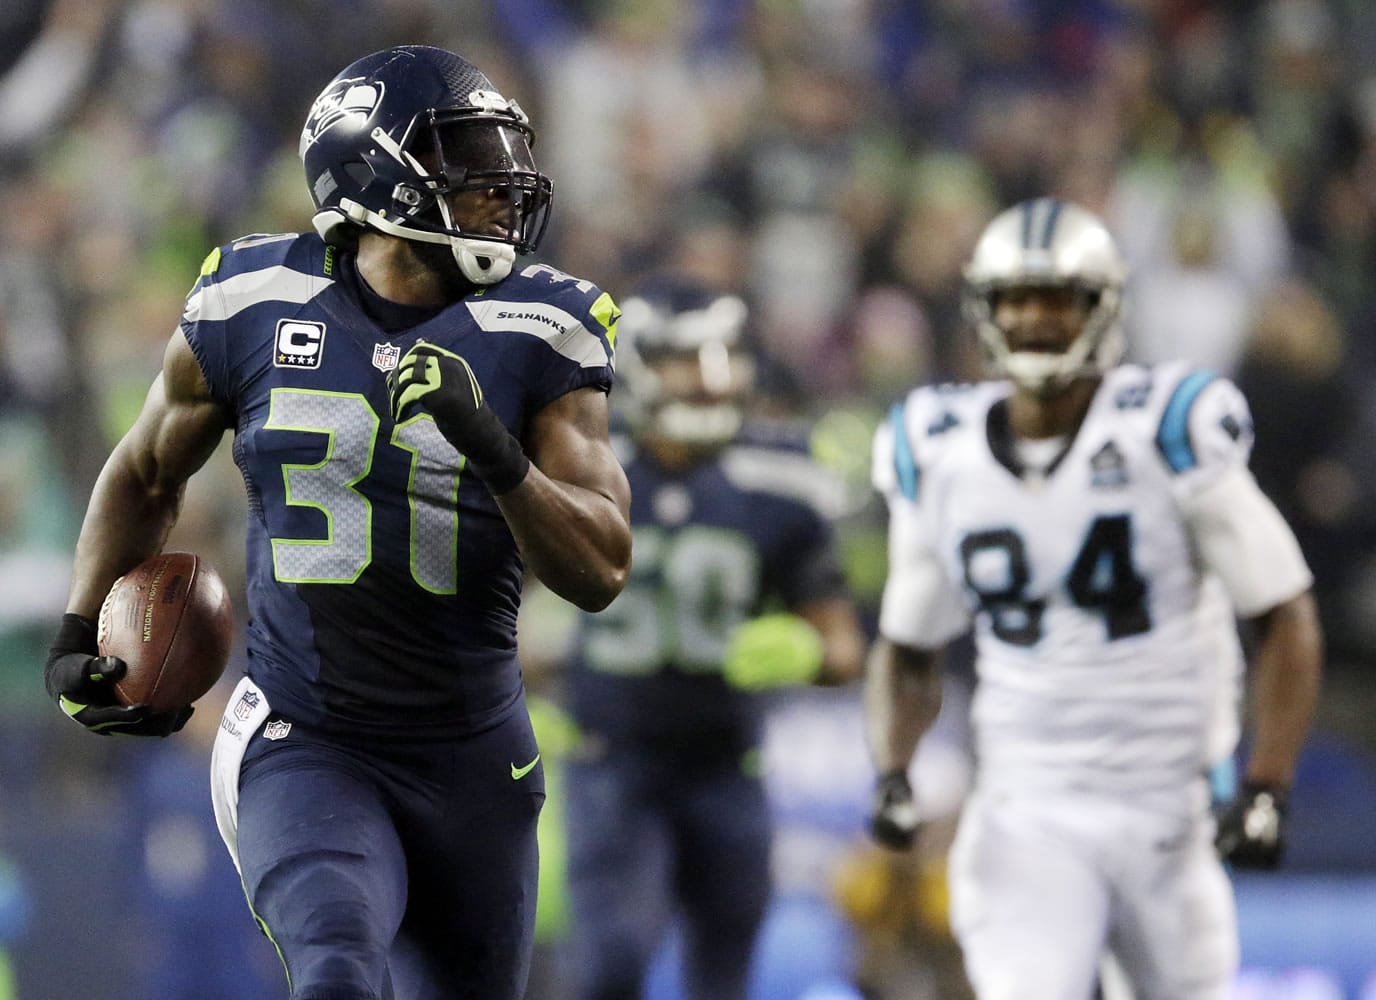 Seattle Seahawks strong safety Kam Chancellor (31) runs in front of Carolina Panthers tight end Ed Dickson (84) to score on a 90-yard interception return in the fourth quarter Saturday in the NFL divisional playoff game in Seattle, Saturday, Jan. 10, 2015.